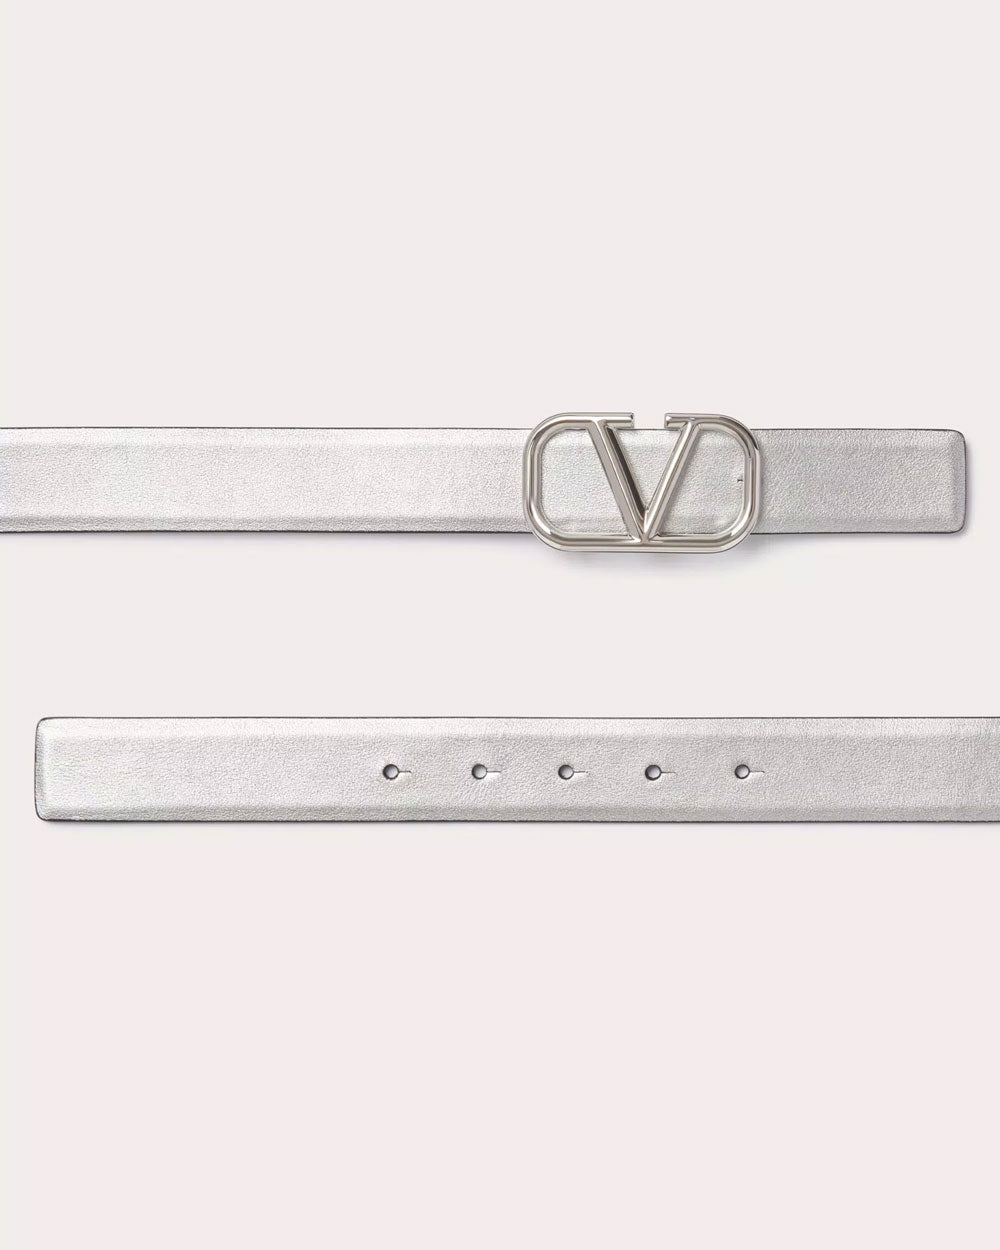 Vlogo Signature Reversible Belt in SIlver and Opal Grey